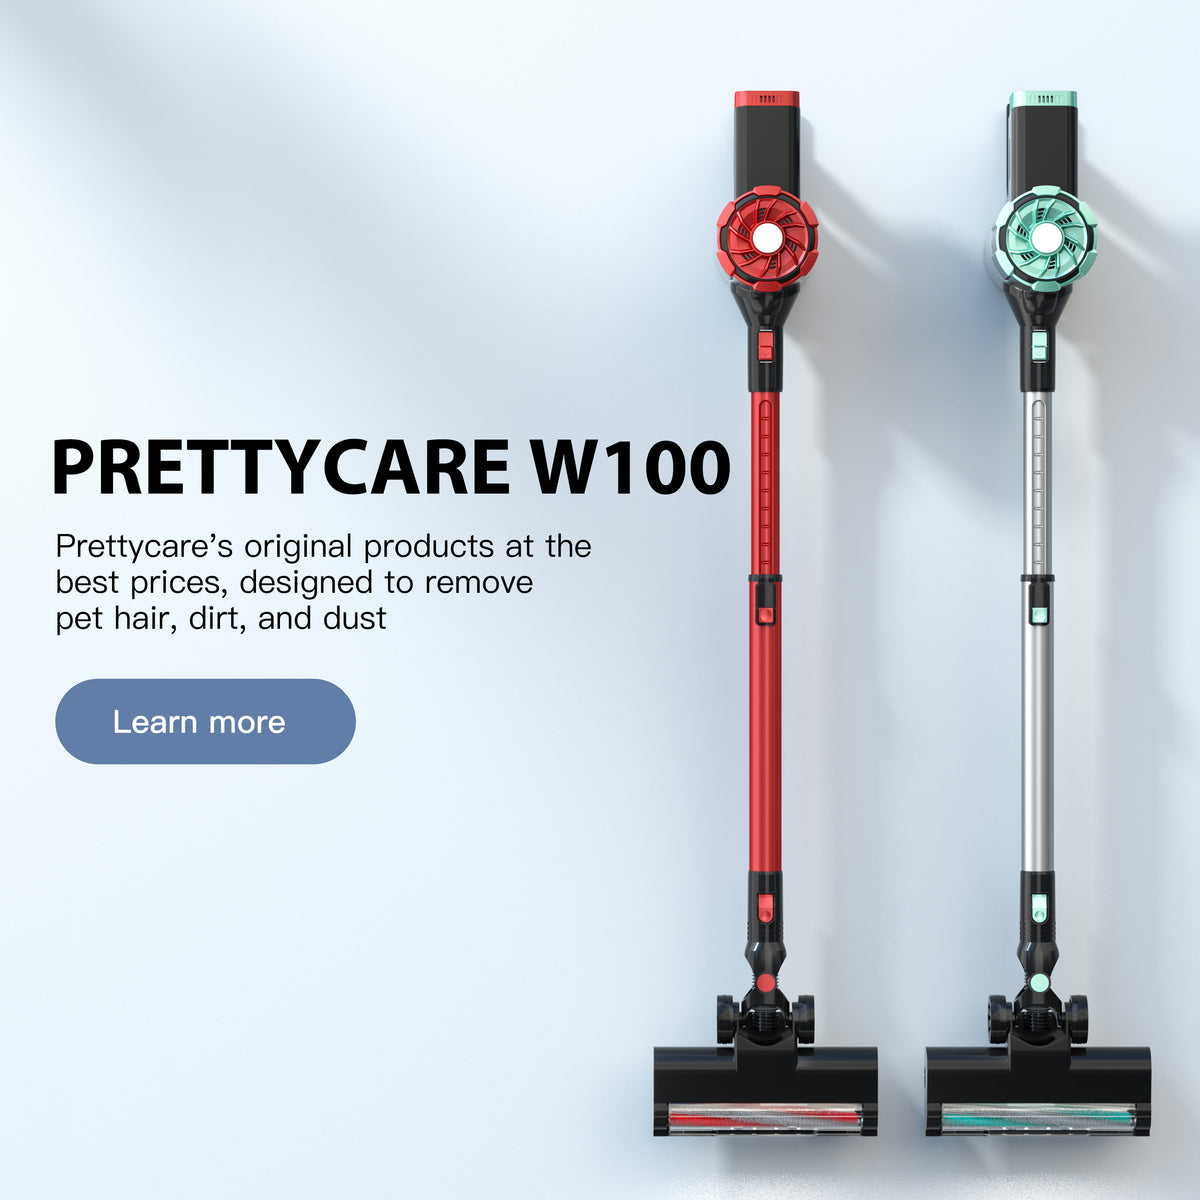 New PrettyCare W400 Rechargeable Vacuum Cleaner – PayMore Cary